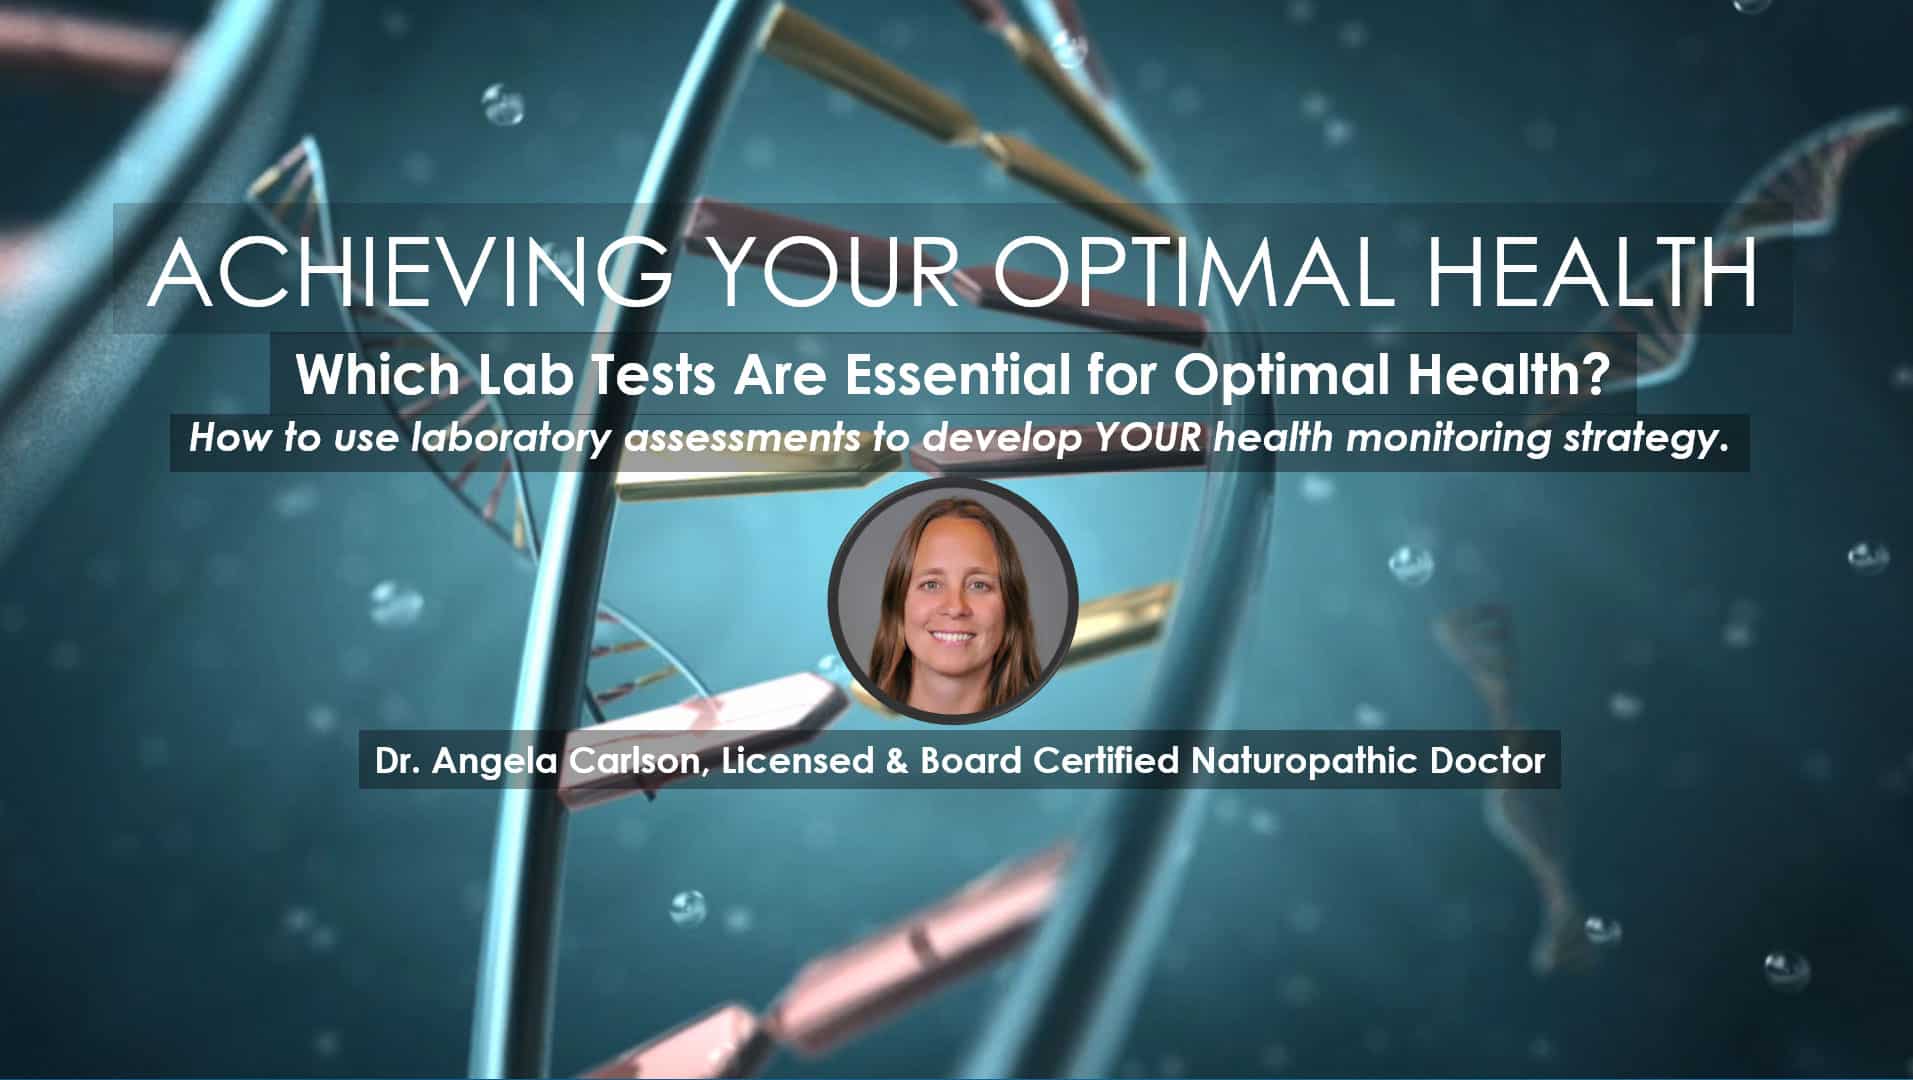 Which Lab Tests Are Essential for Optimal Health? Webinar by Dr. Angela Carlson in the series "Achieving Your Optimal Health"